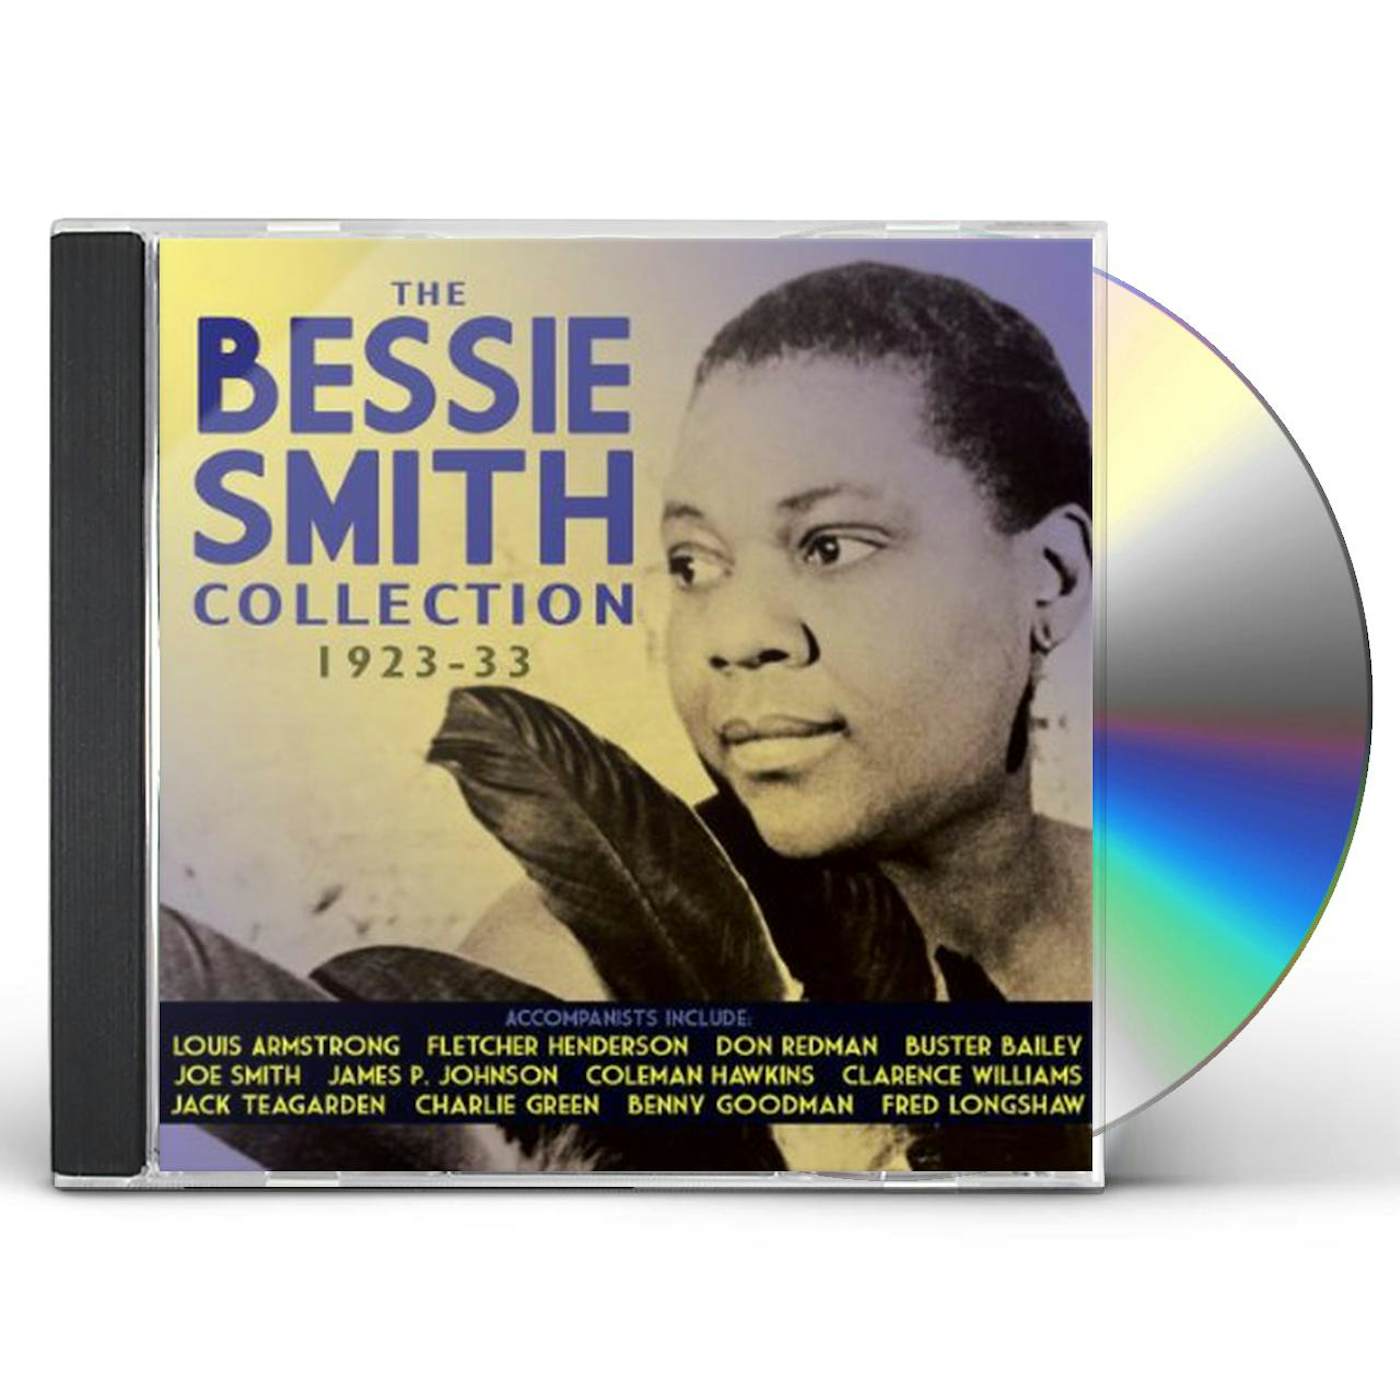 BESSIE SMITH COLLECTION 1923-33 CD